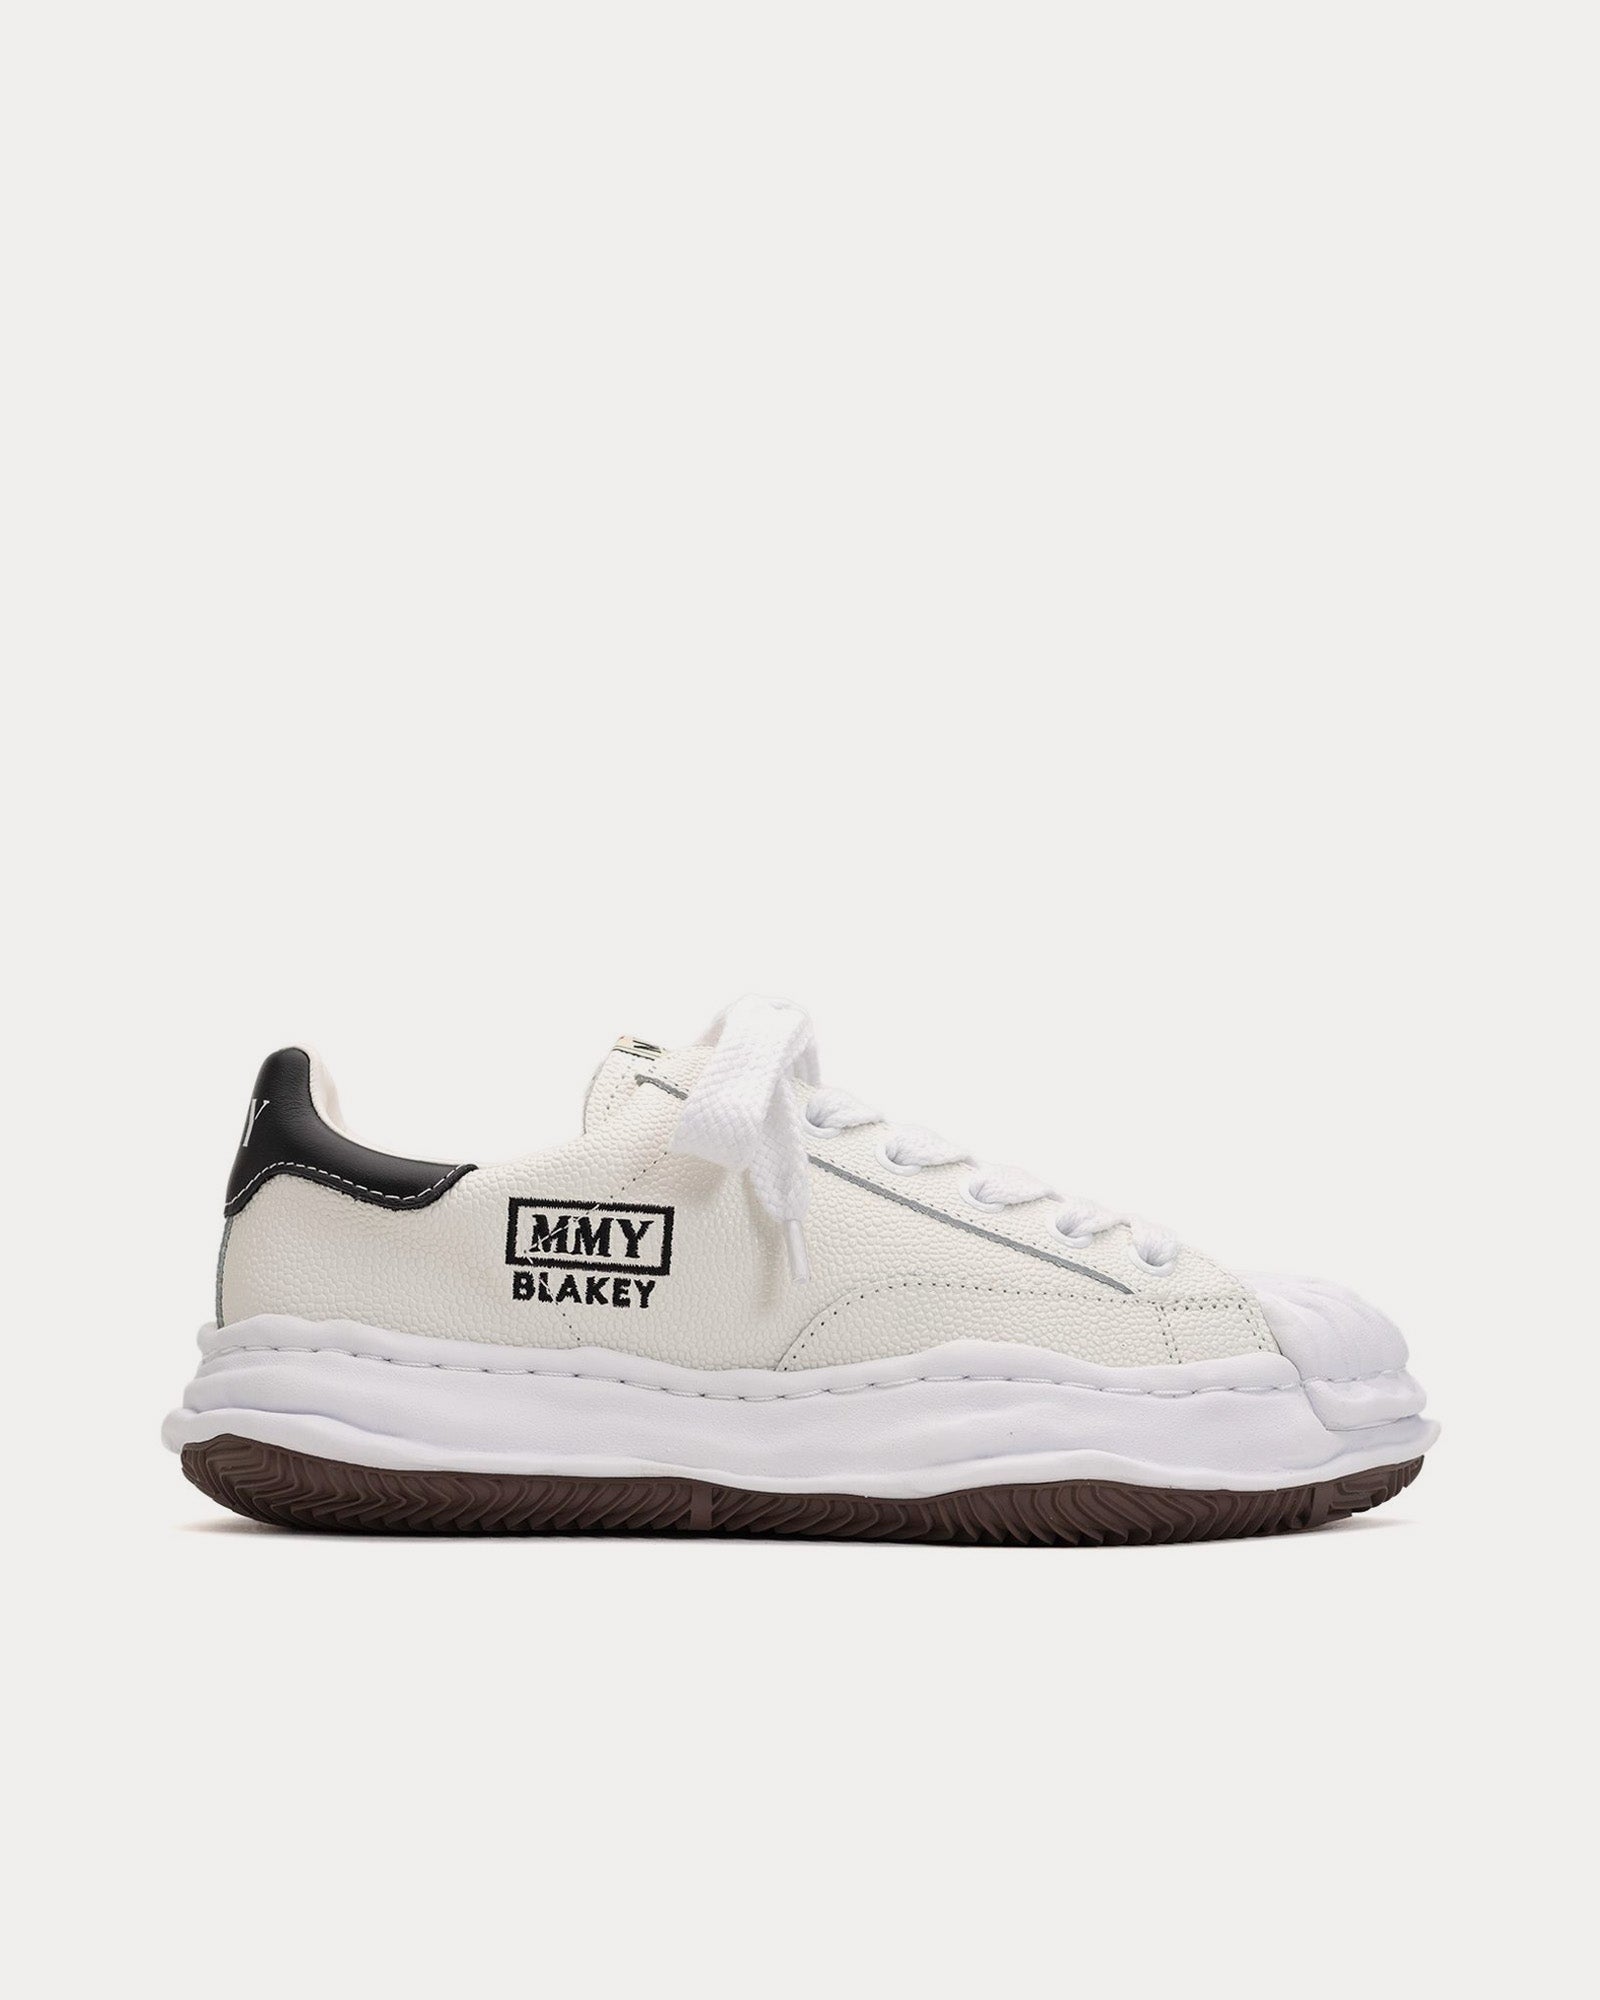 Blakey OG Sole Embossed Leather White Low Top Sneakers